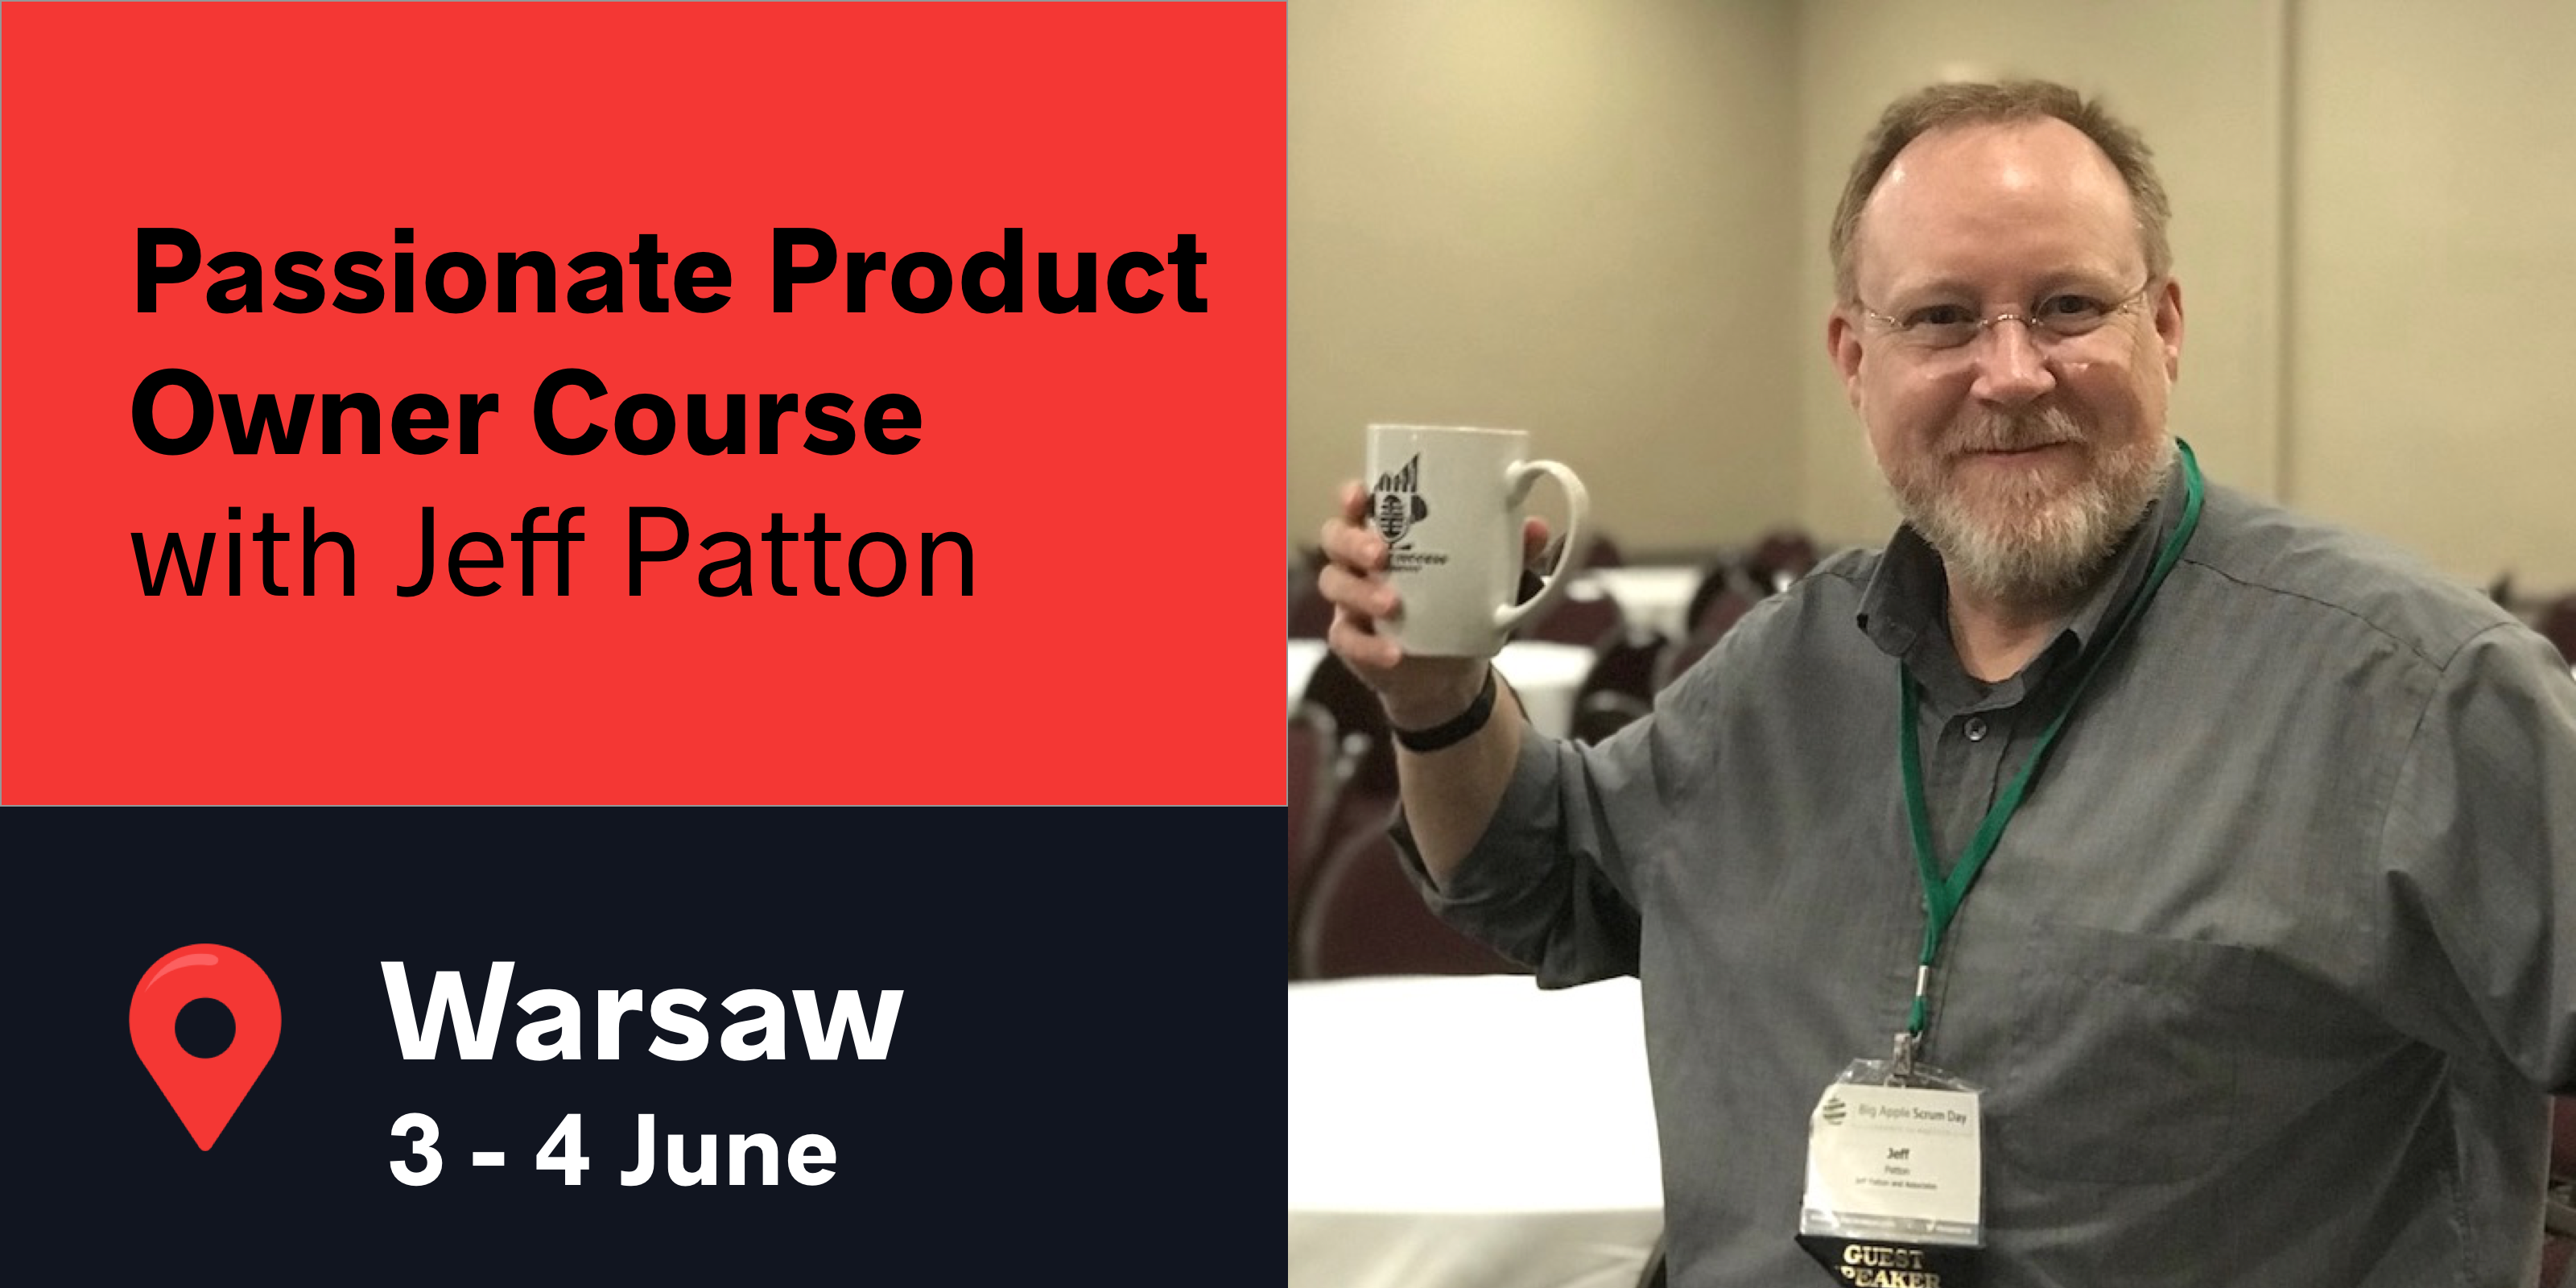 ultimo-school-passionate-product-owner-course-with-jeff-patton-czerwiec-2019